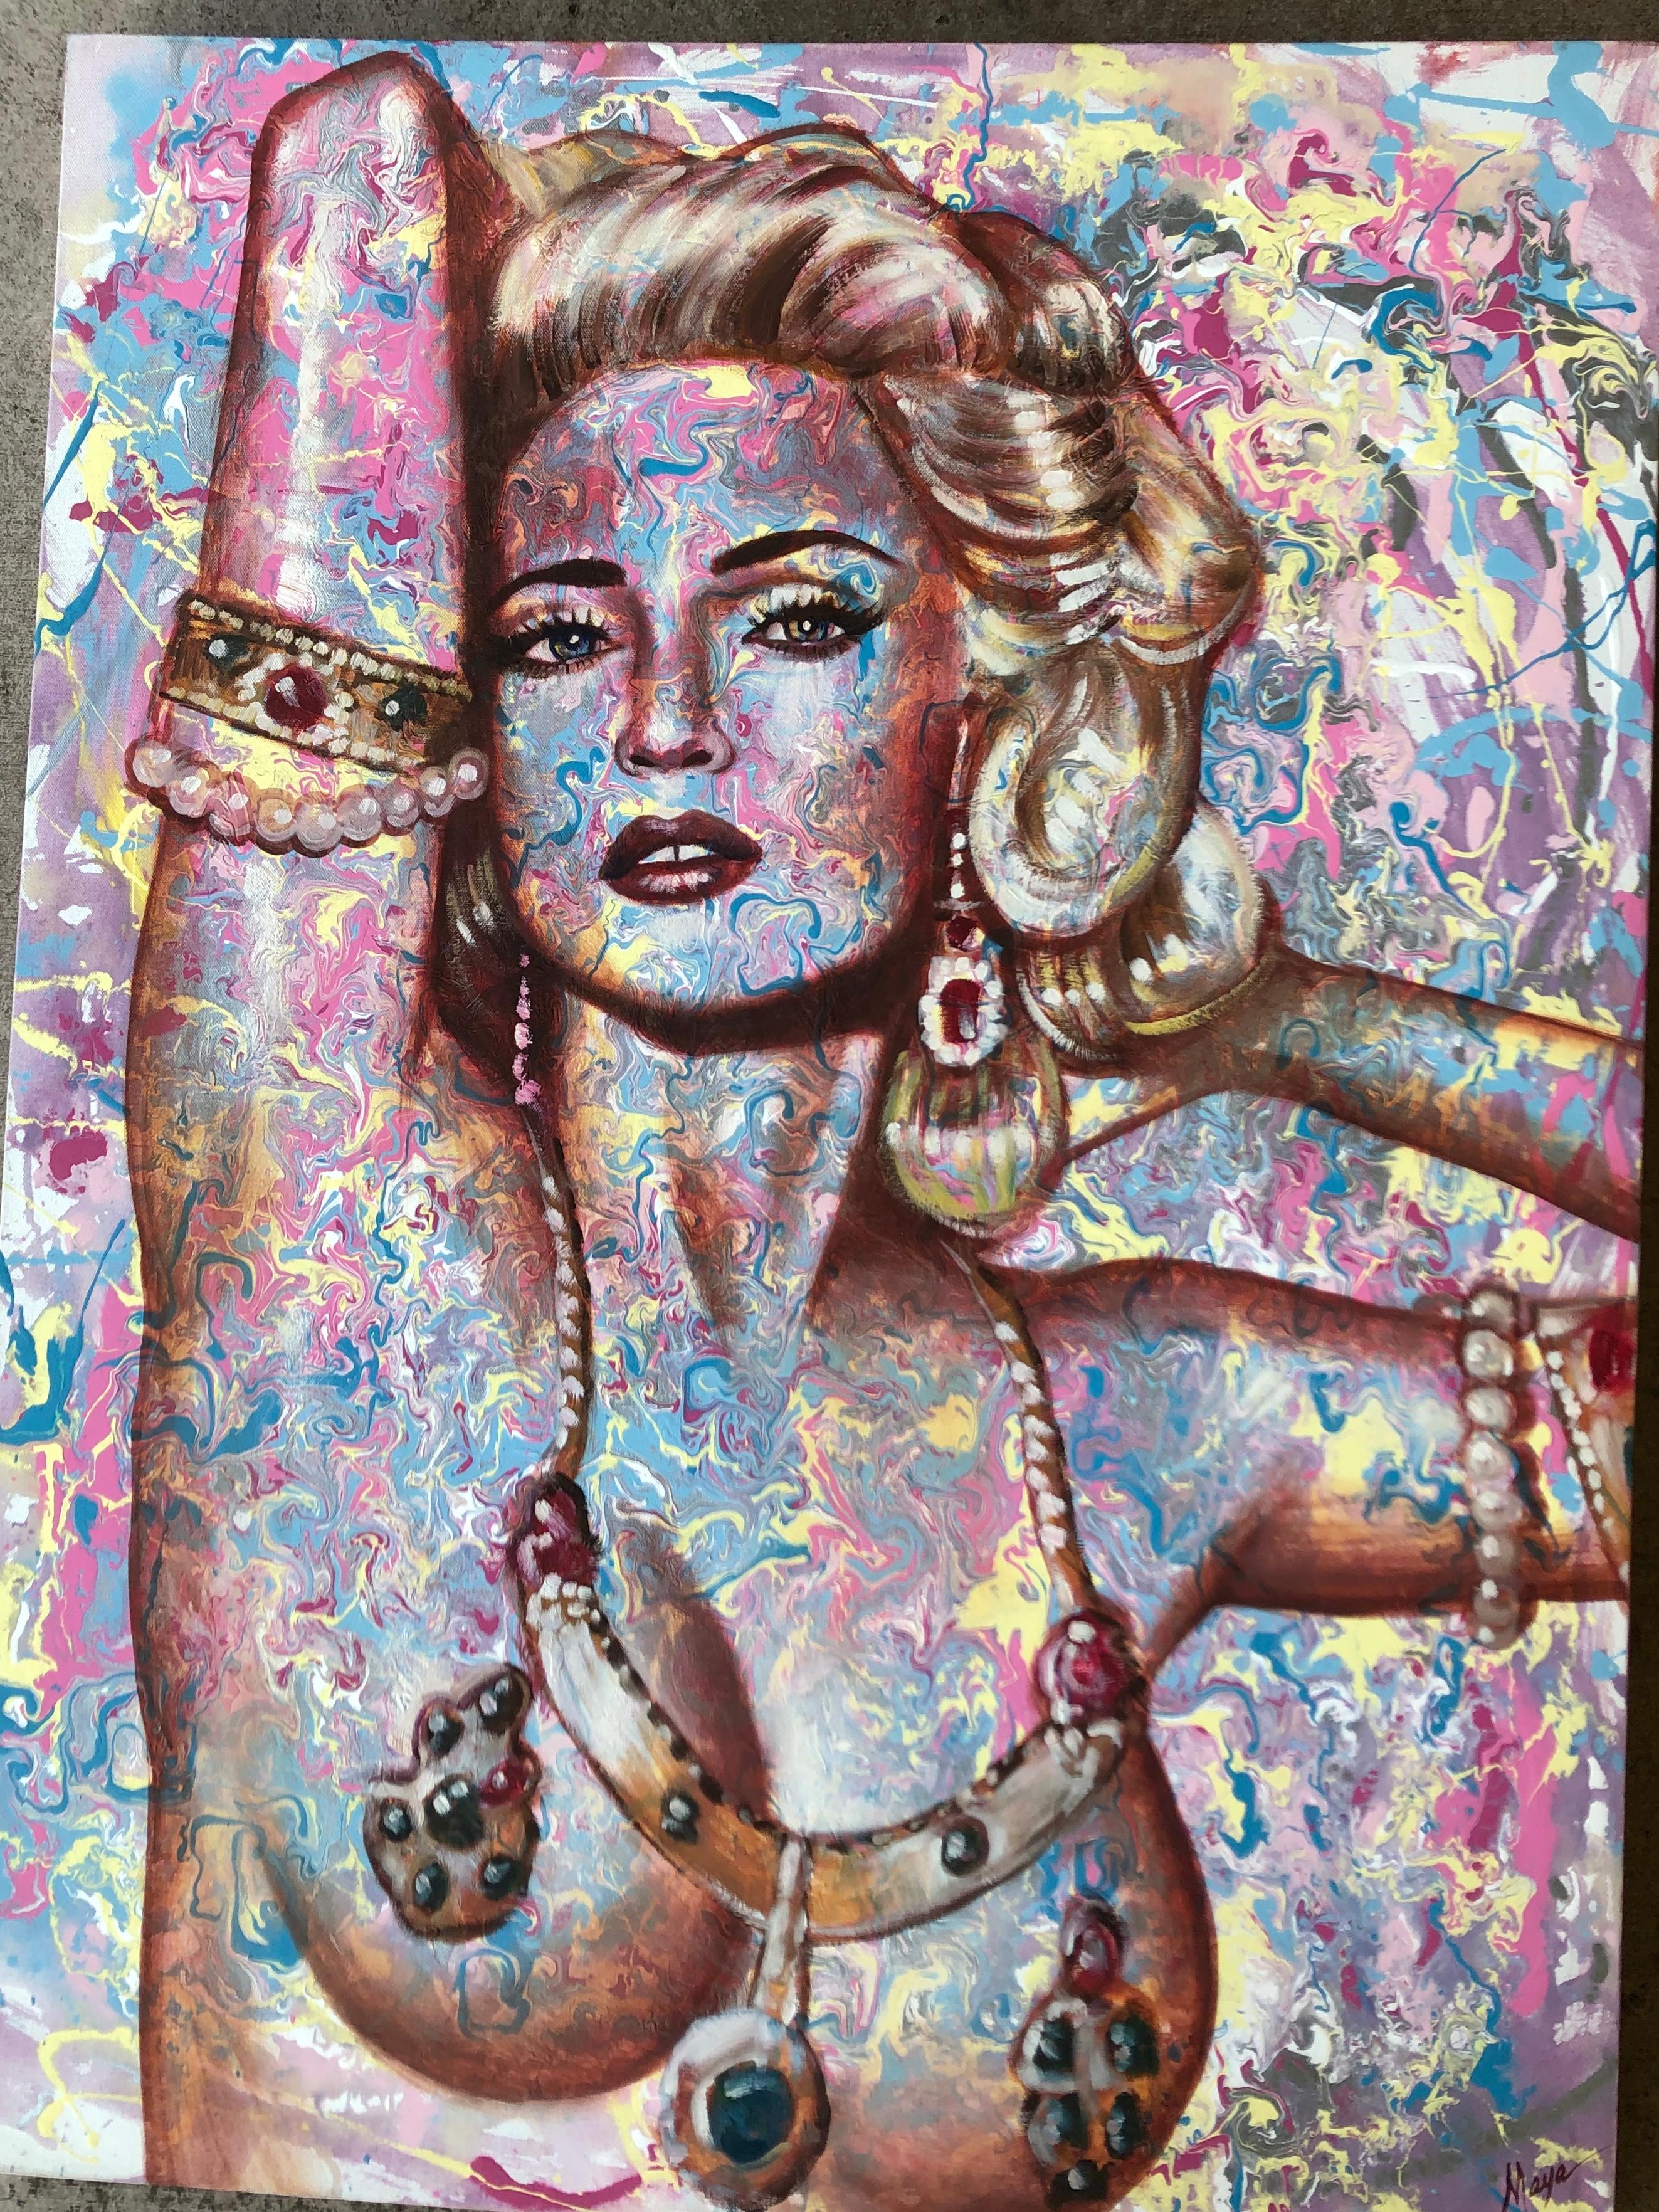 Fabulous original abstract pop art painting on canvas of famous singing sensation, Madonna, by famous celebrity portrait artist, Maya Spielman, in juicy shades of pink, turquoise, yellow. Signed 